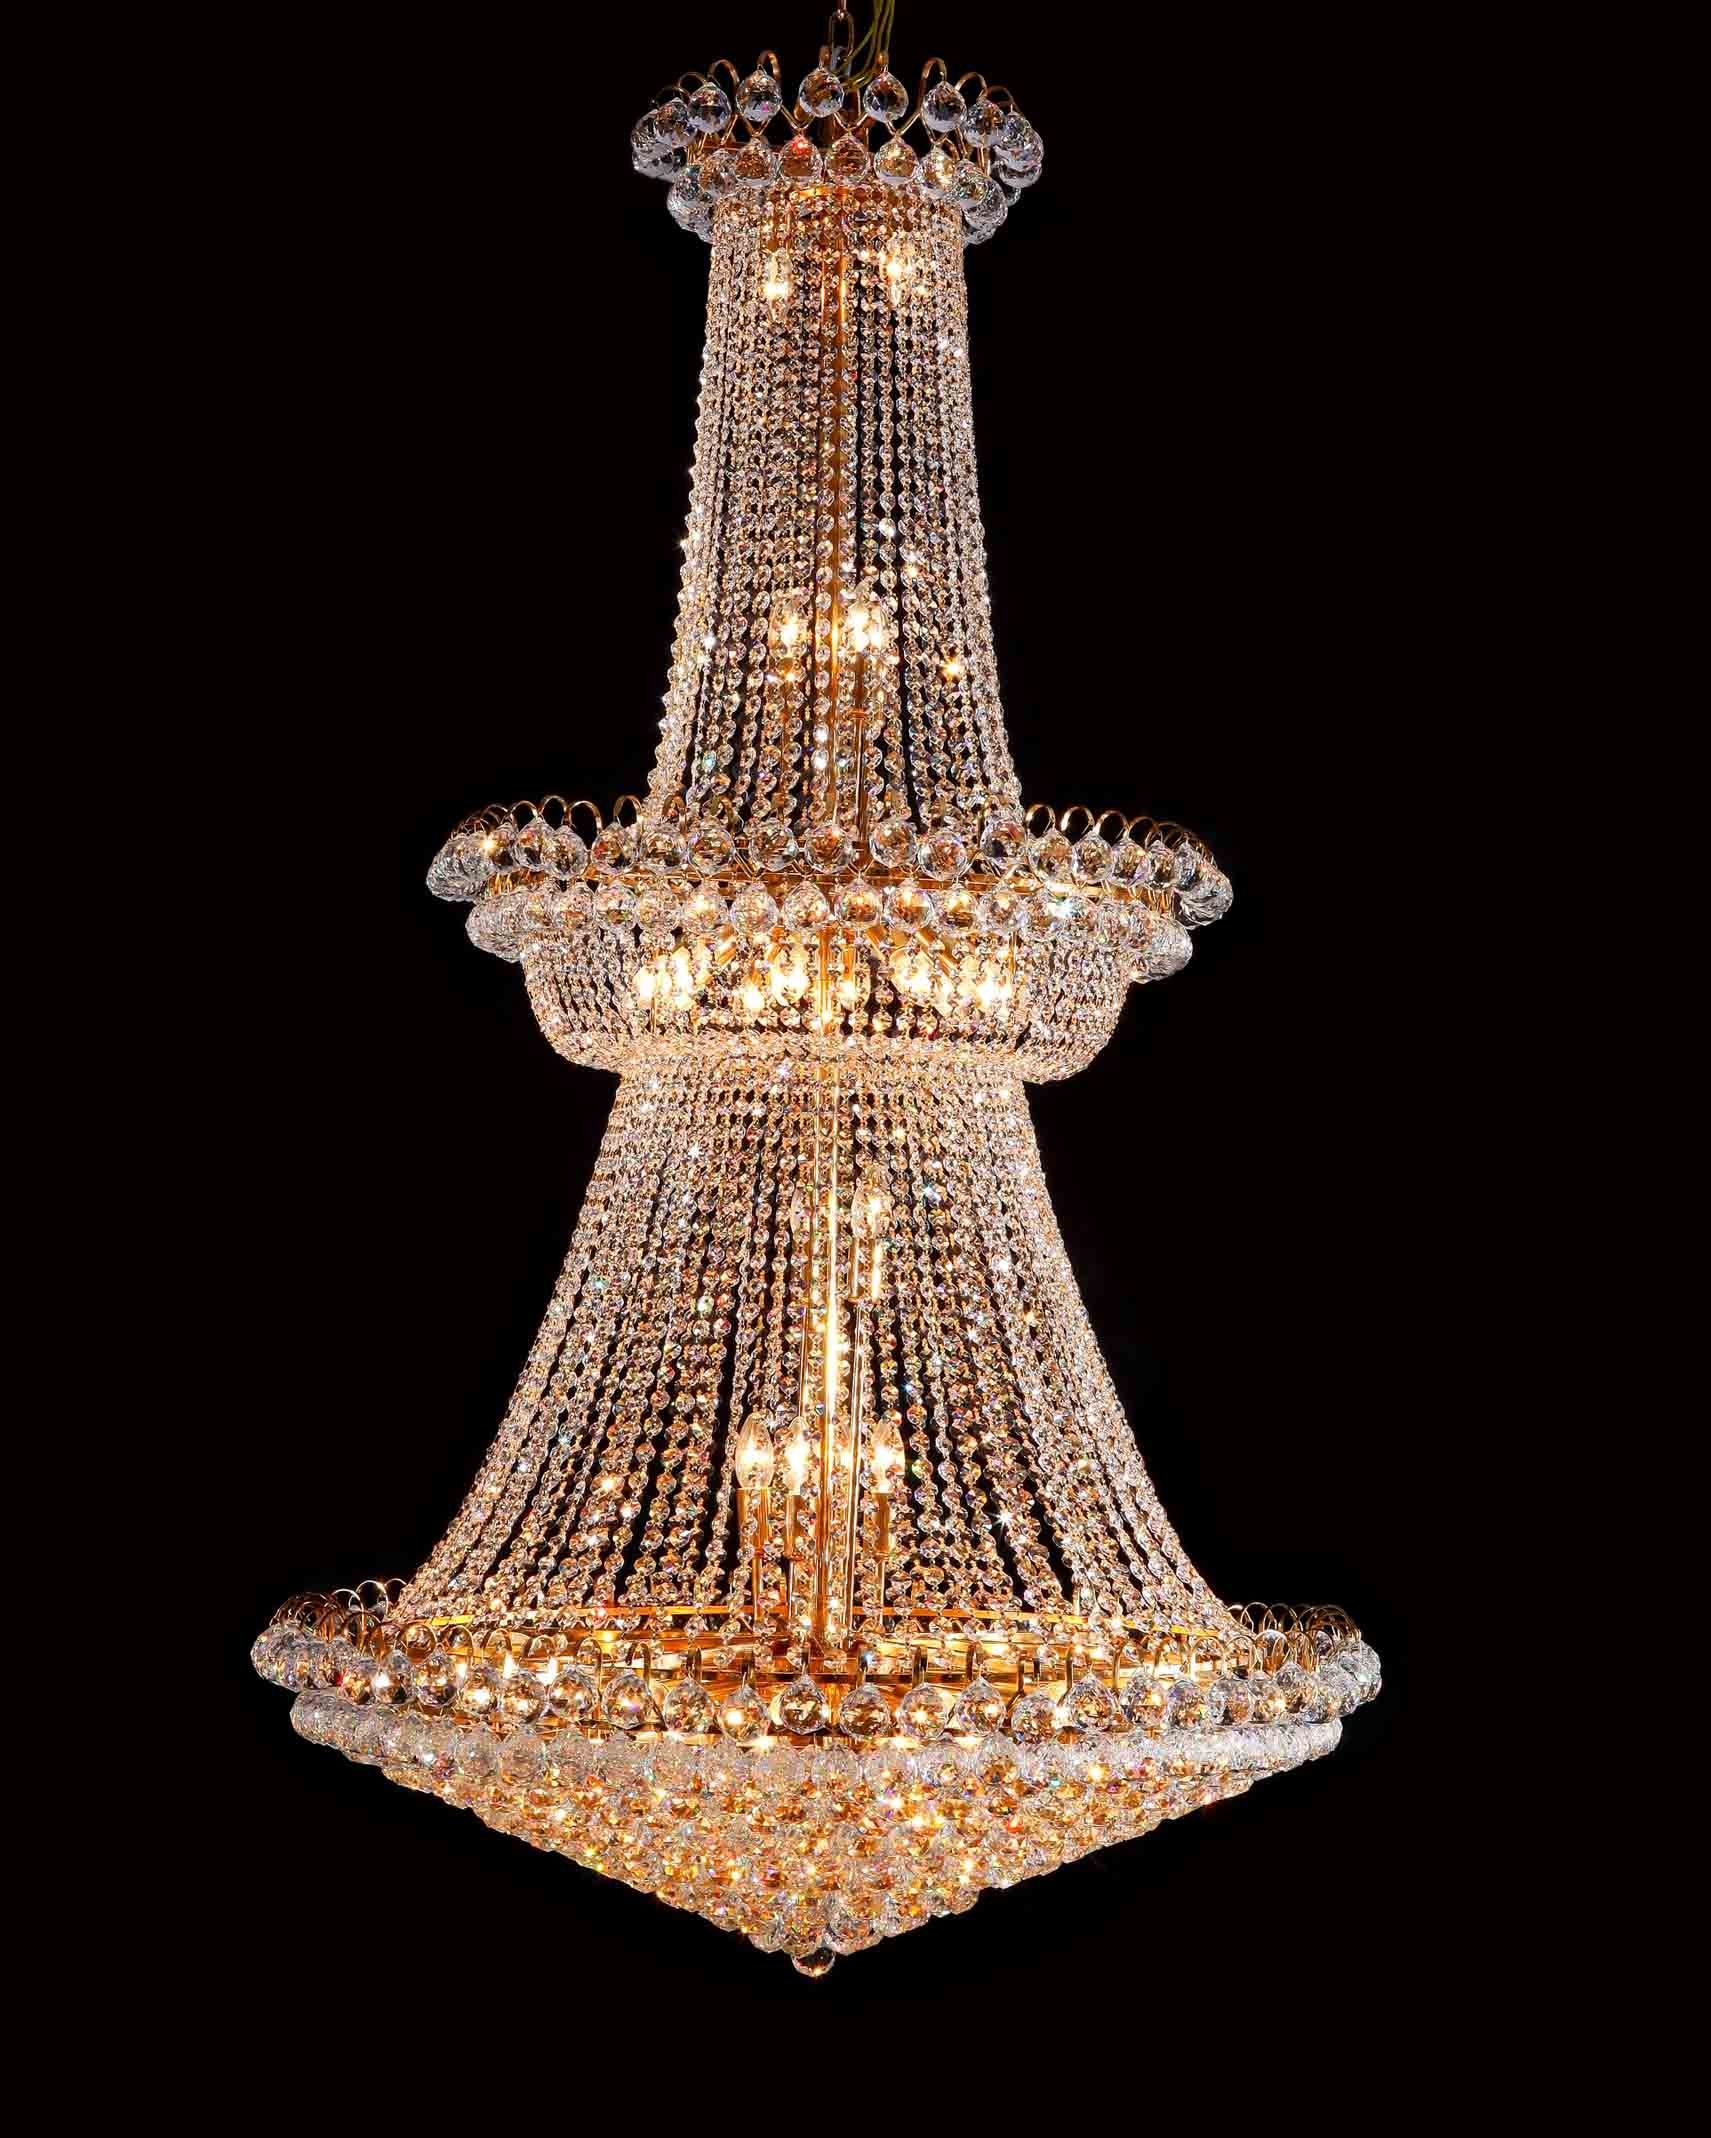 Chandelier Awesome Large Crystal Chandelier Big Modern Chandelier For Large Crystal Chandeliers (View 4 of 15)